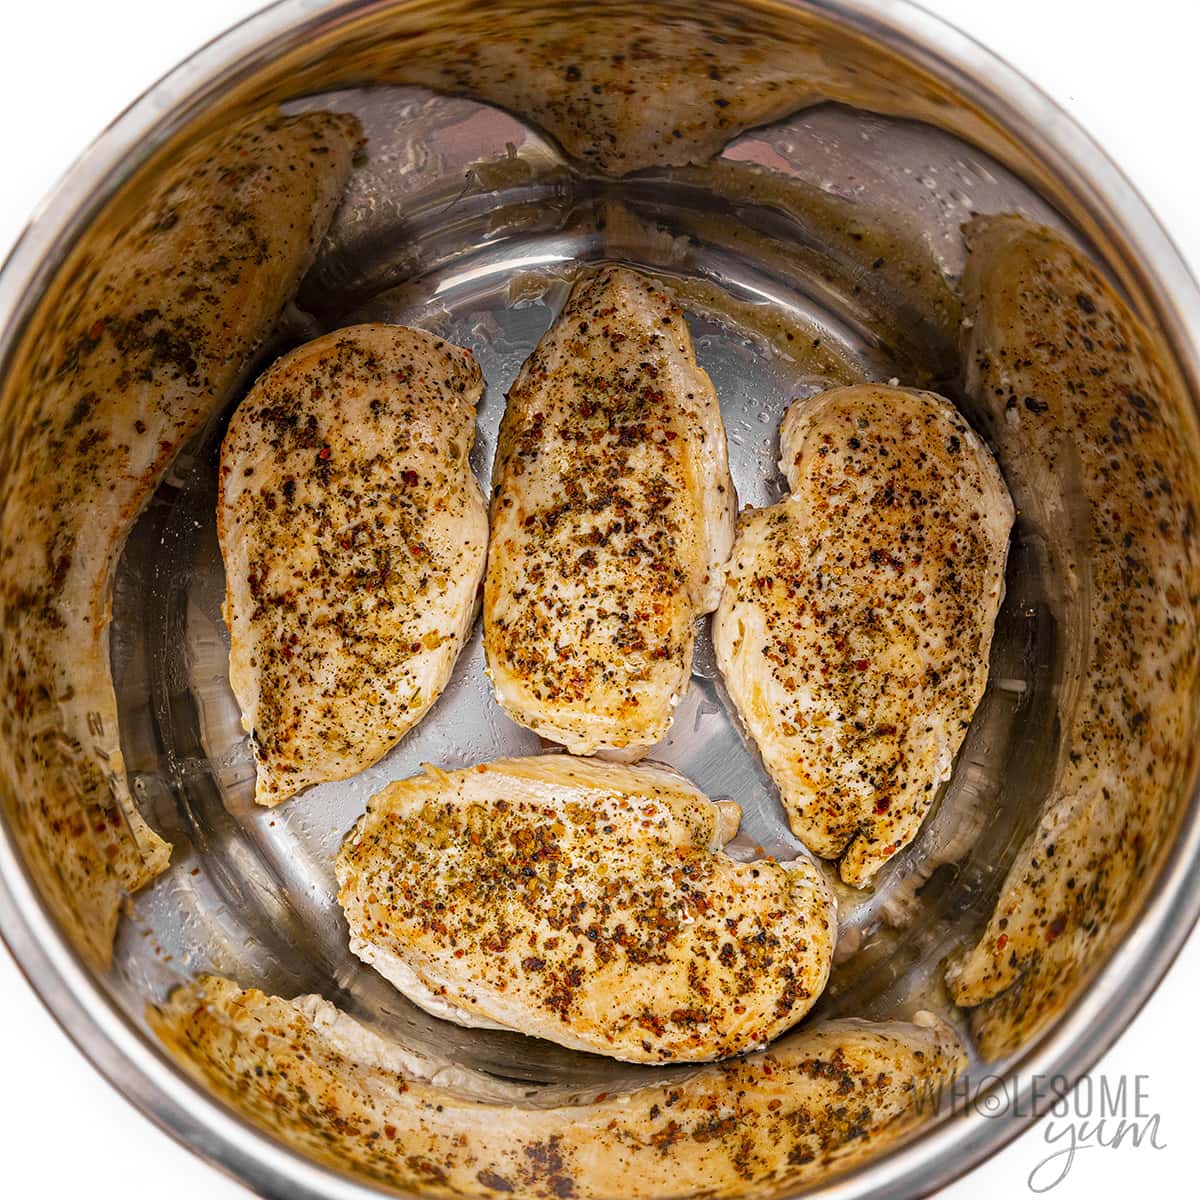 Place chicken in Instant Pot and sear until done.